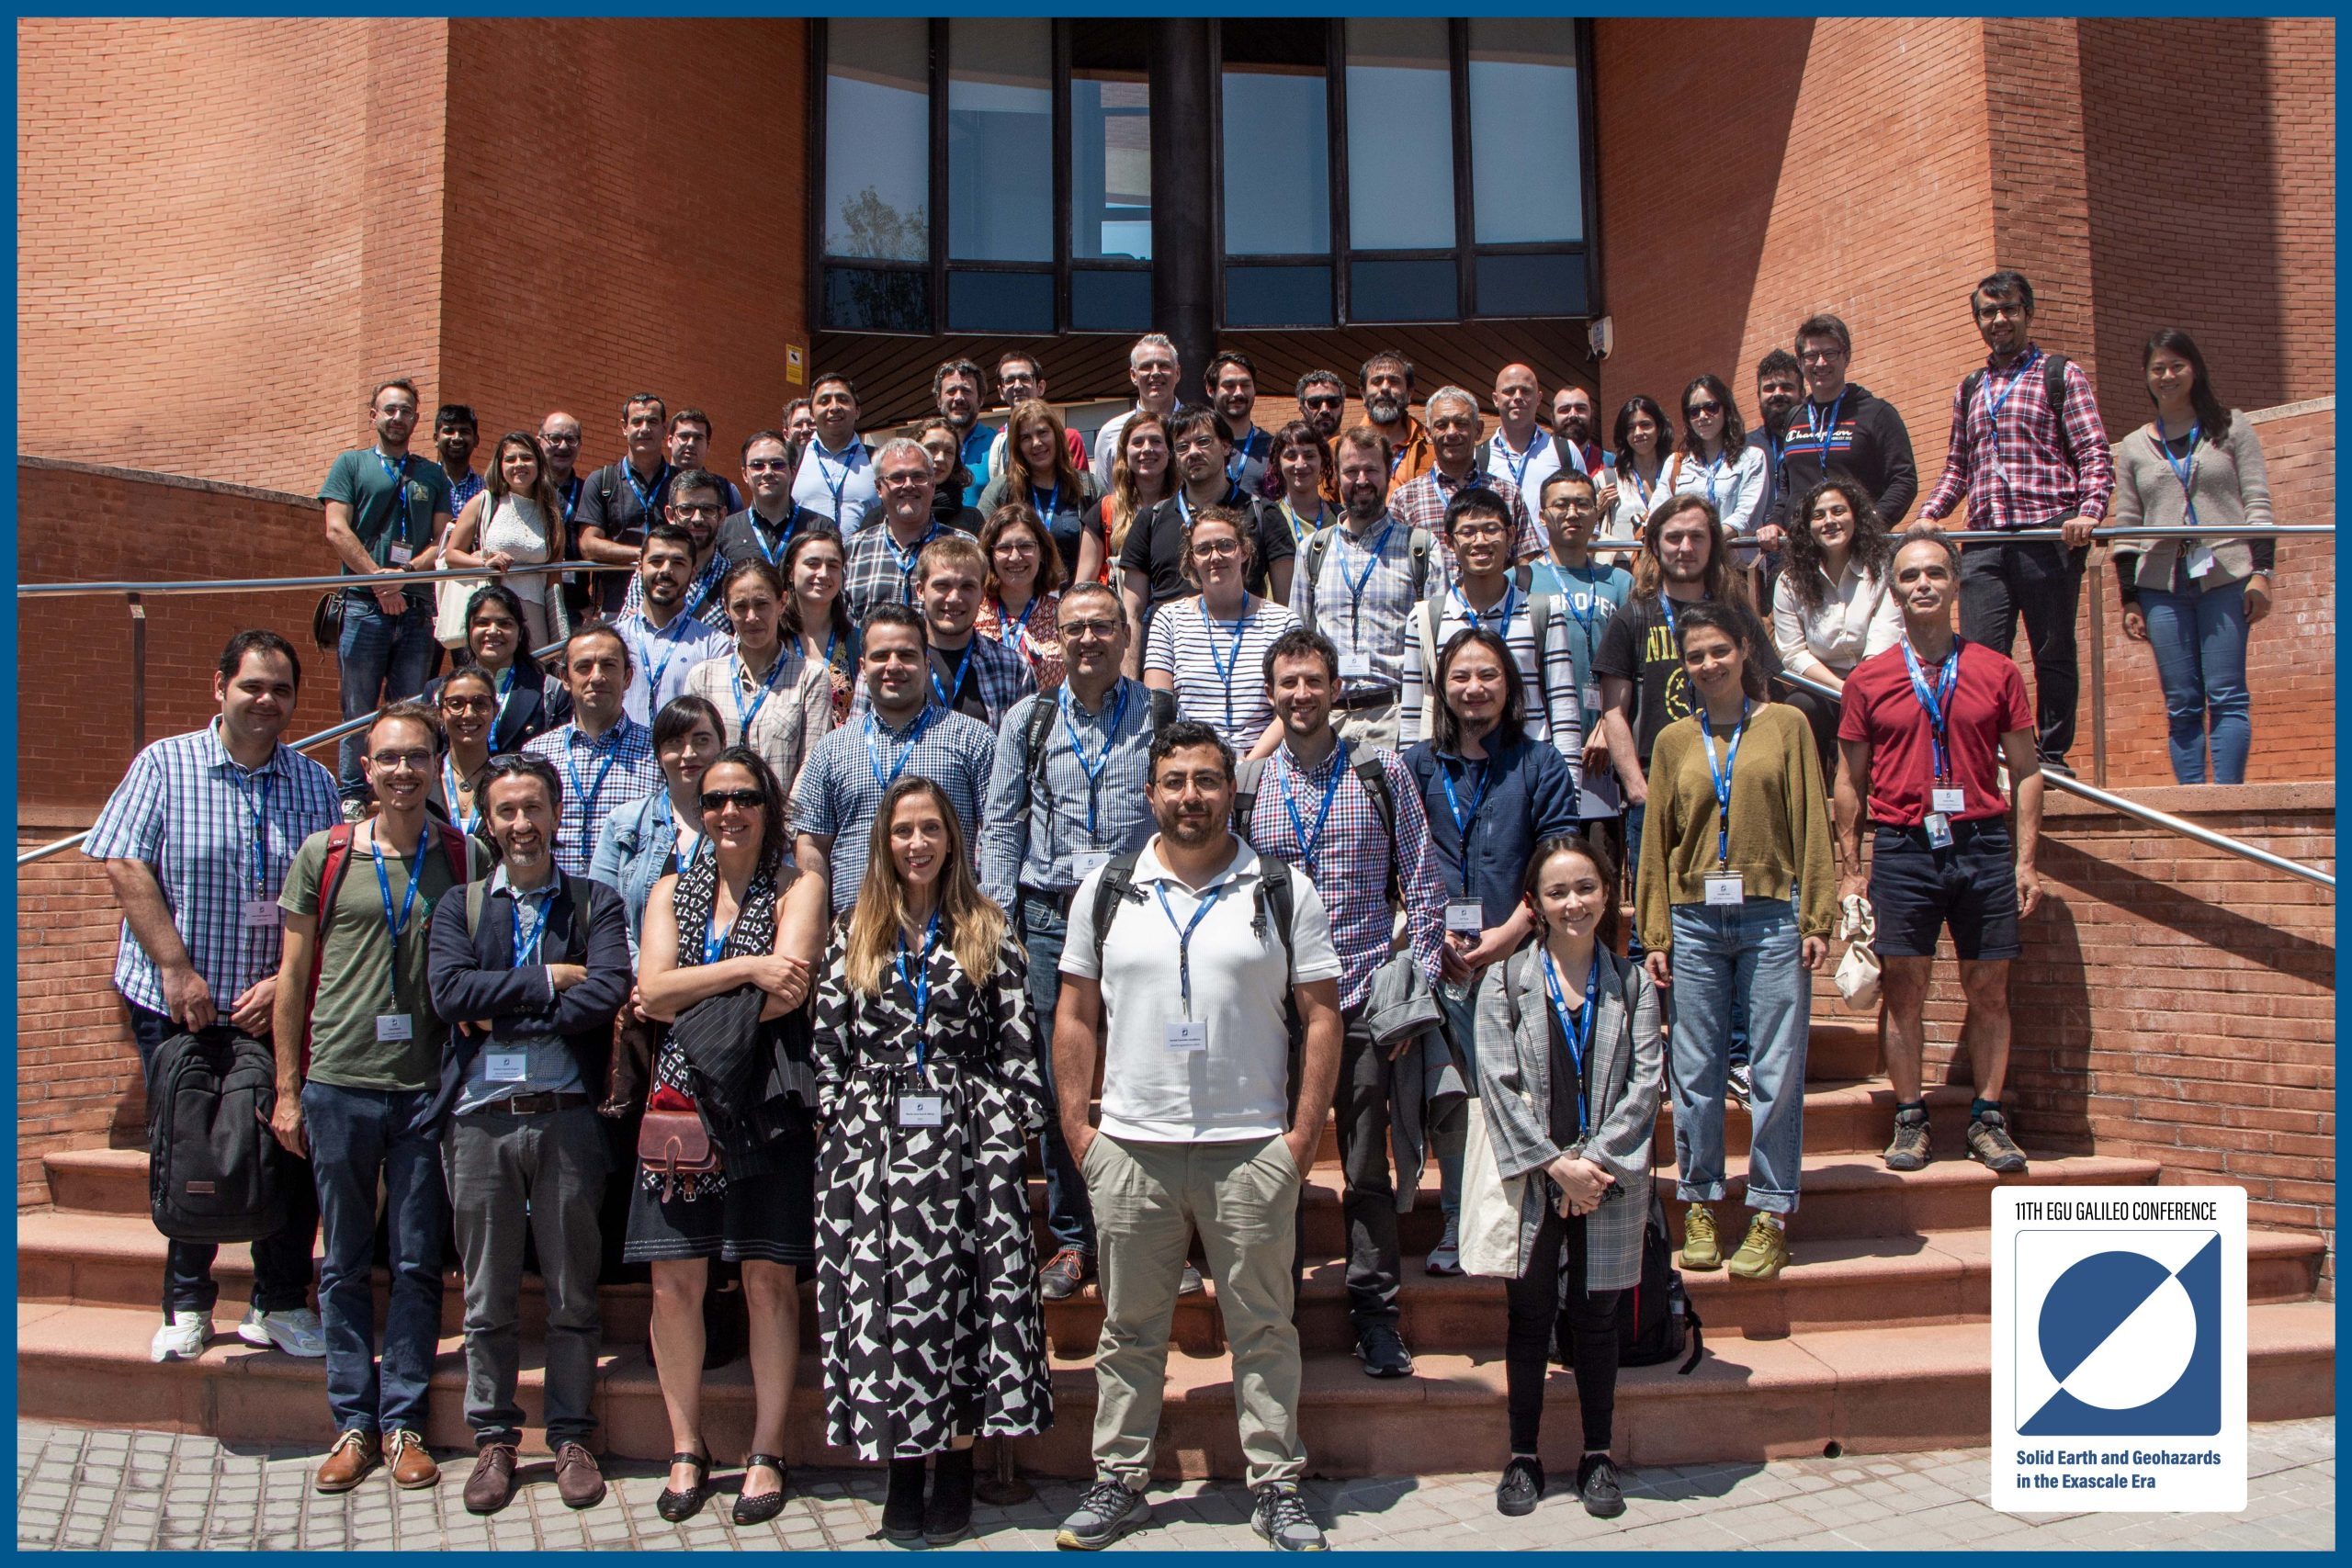 ChEESE Endorses Successful Galileo Conference on Solid Earth and Geohazards in the Exascale Era